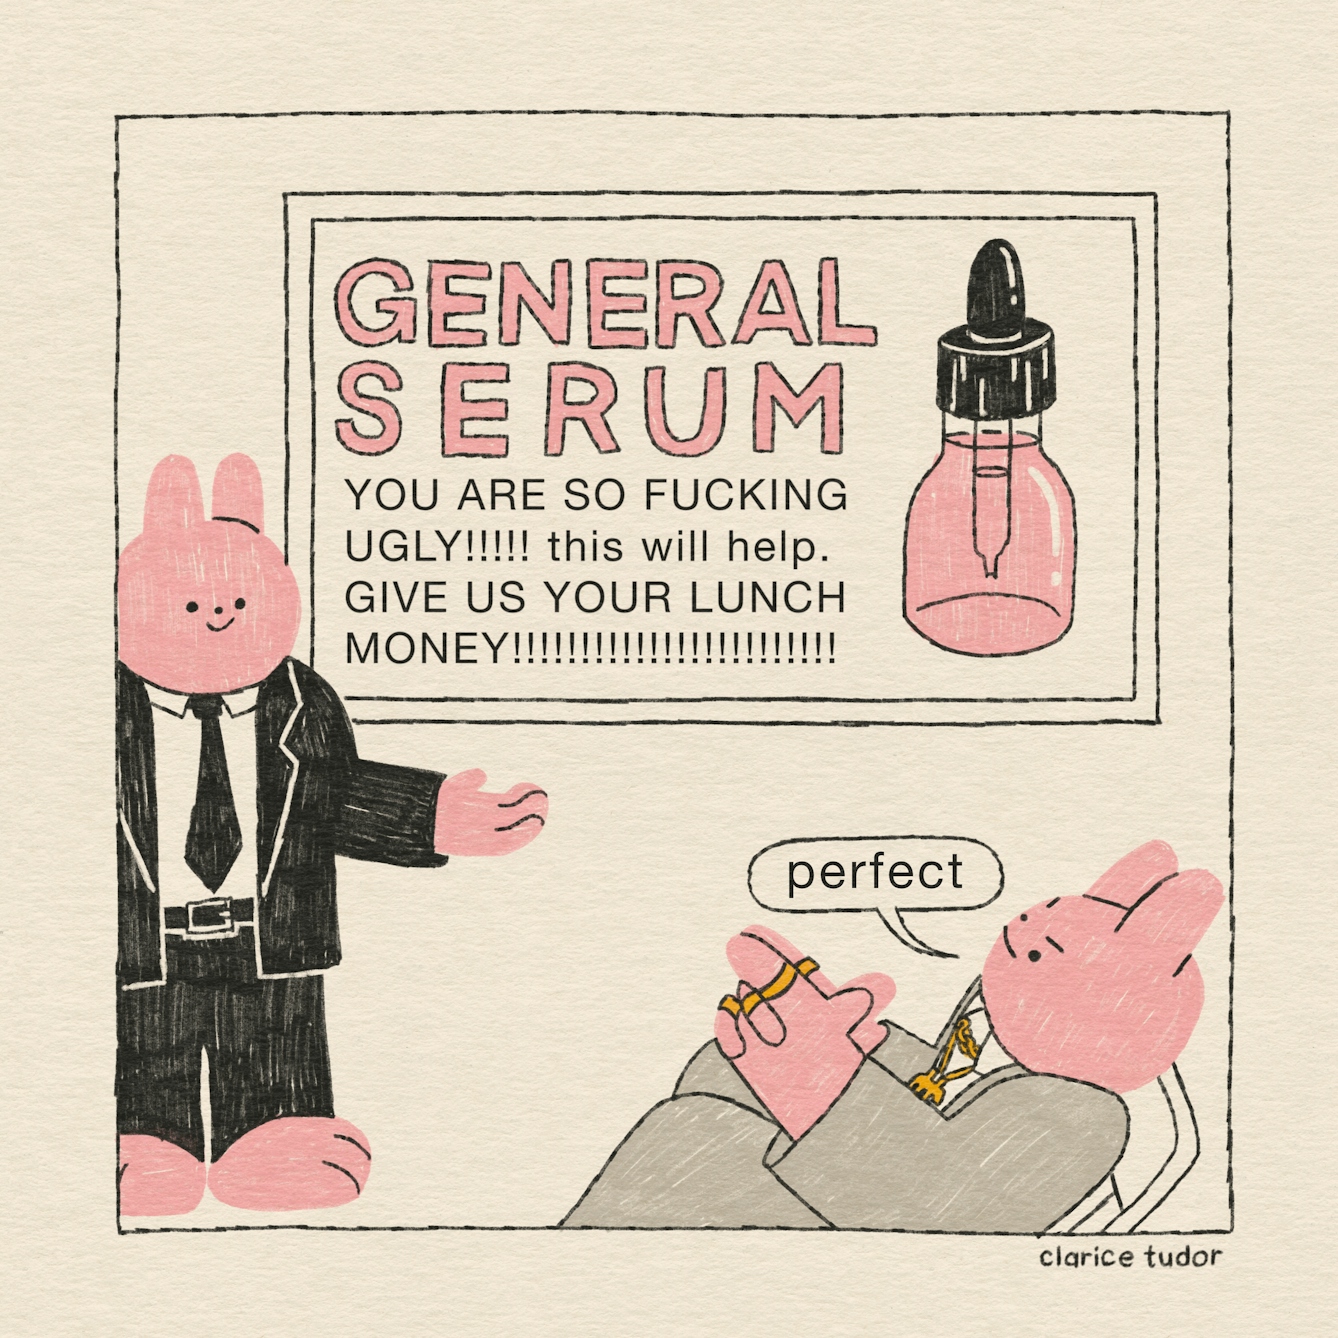 A pink rabbit in a black suit and tie stands in front of his boss, smiling, to pitch a new advert for some face cream. It reads: “General serum. You are so fucking ugly!!!!! This will help. Give us your lunch money!!!!!!!!!!!!!!!!”. The CEO, in his grey suit and gold chains and rings, leans backwards in his chair and rubs his palms together. “Perfect”, he says, with an insidious smile.  